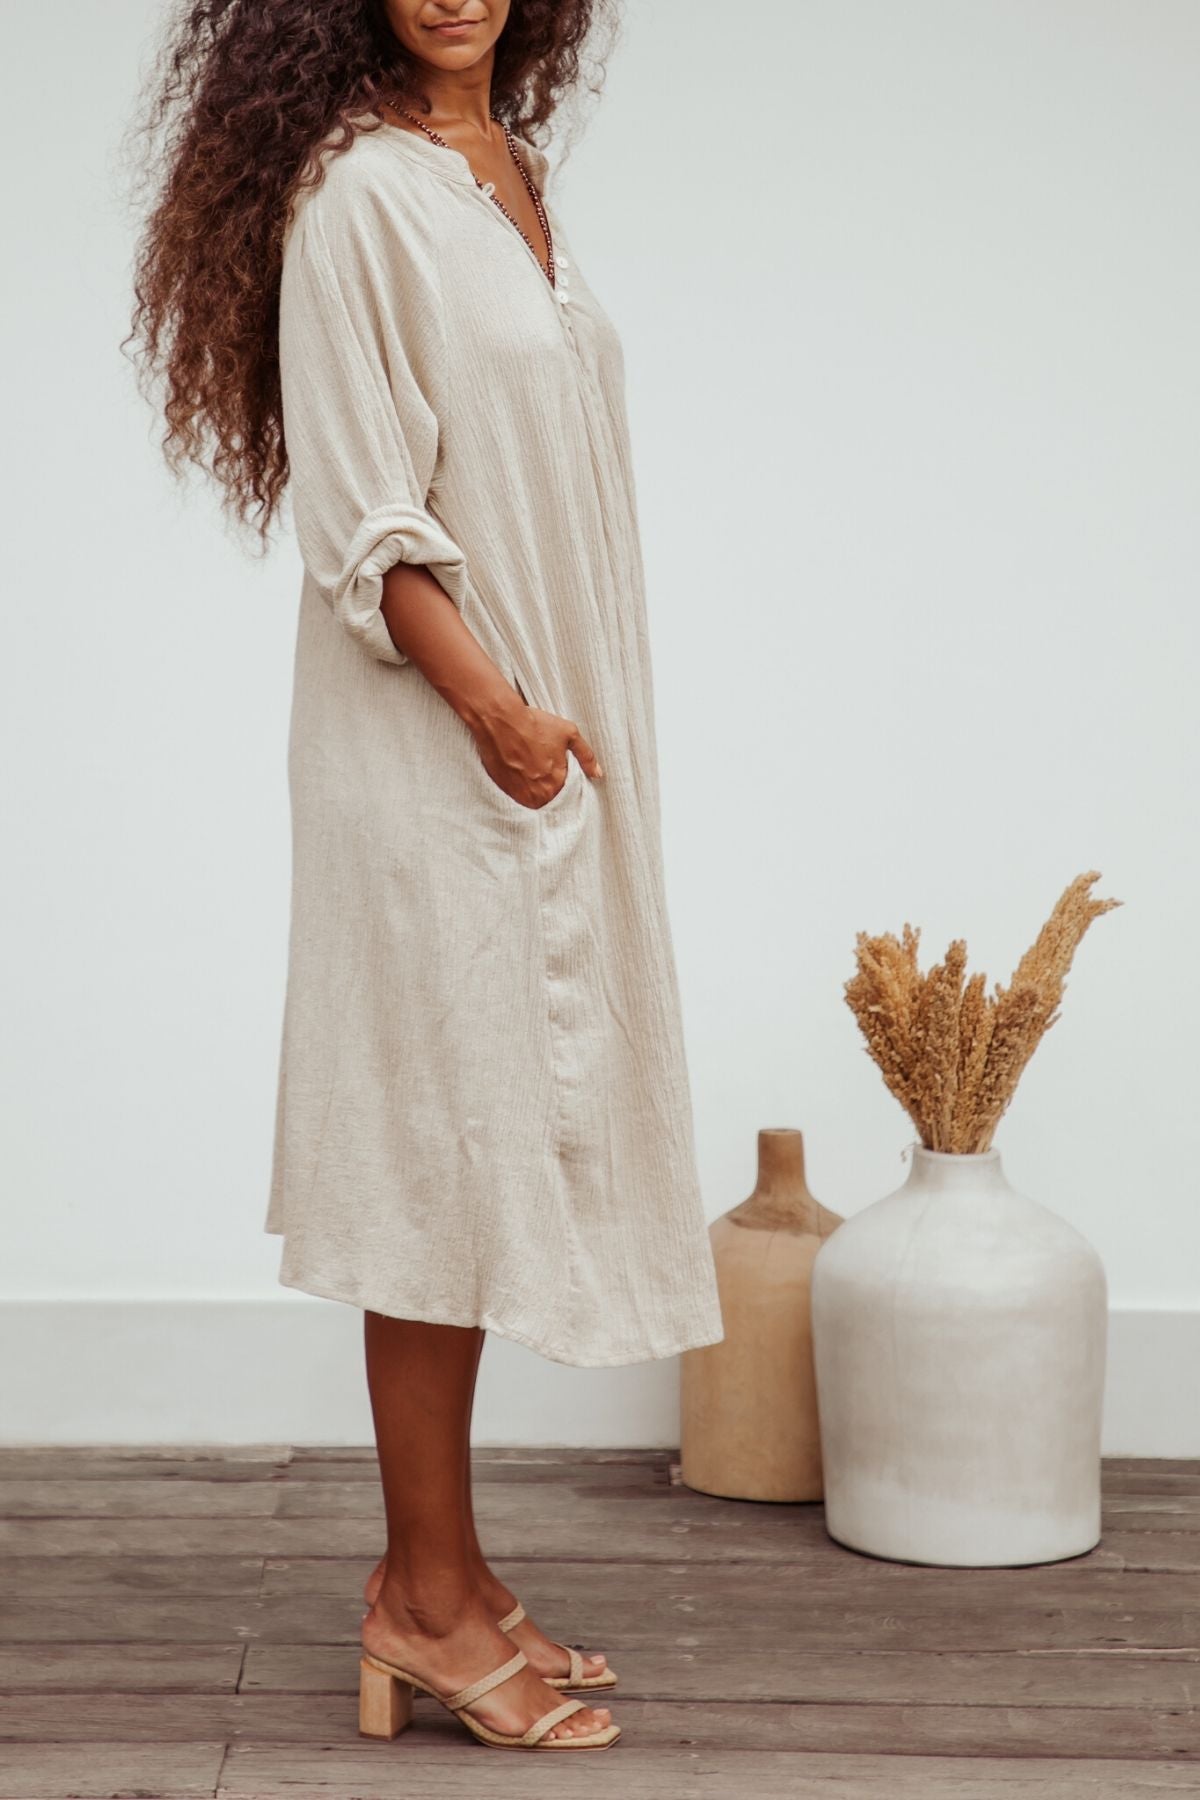 FRIDA Gown Short (100% Crinkle Linen Cotton, Light Flax) WI